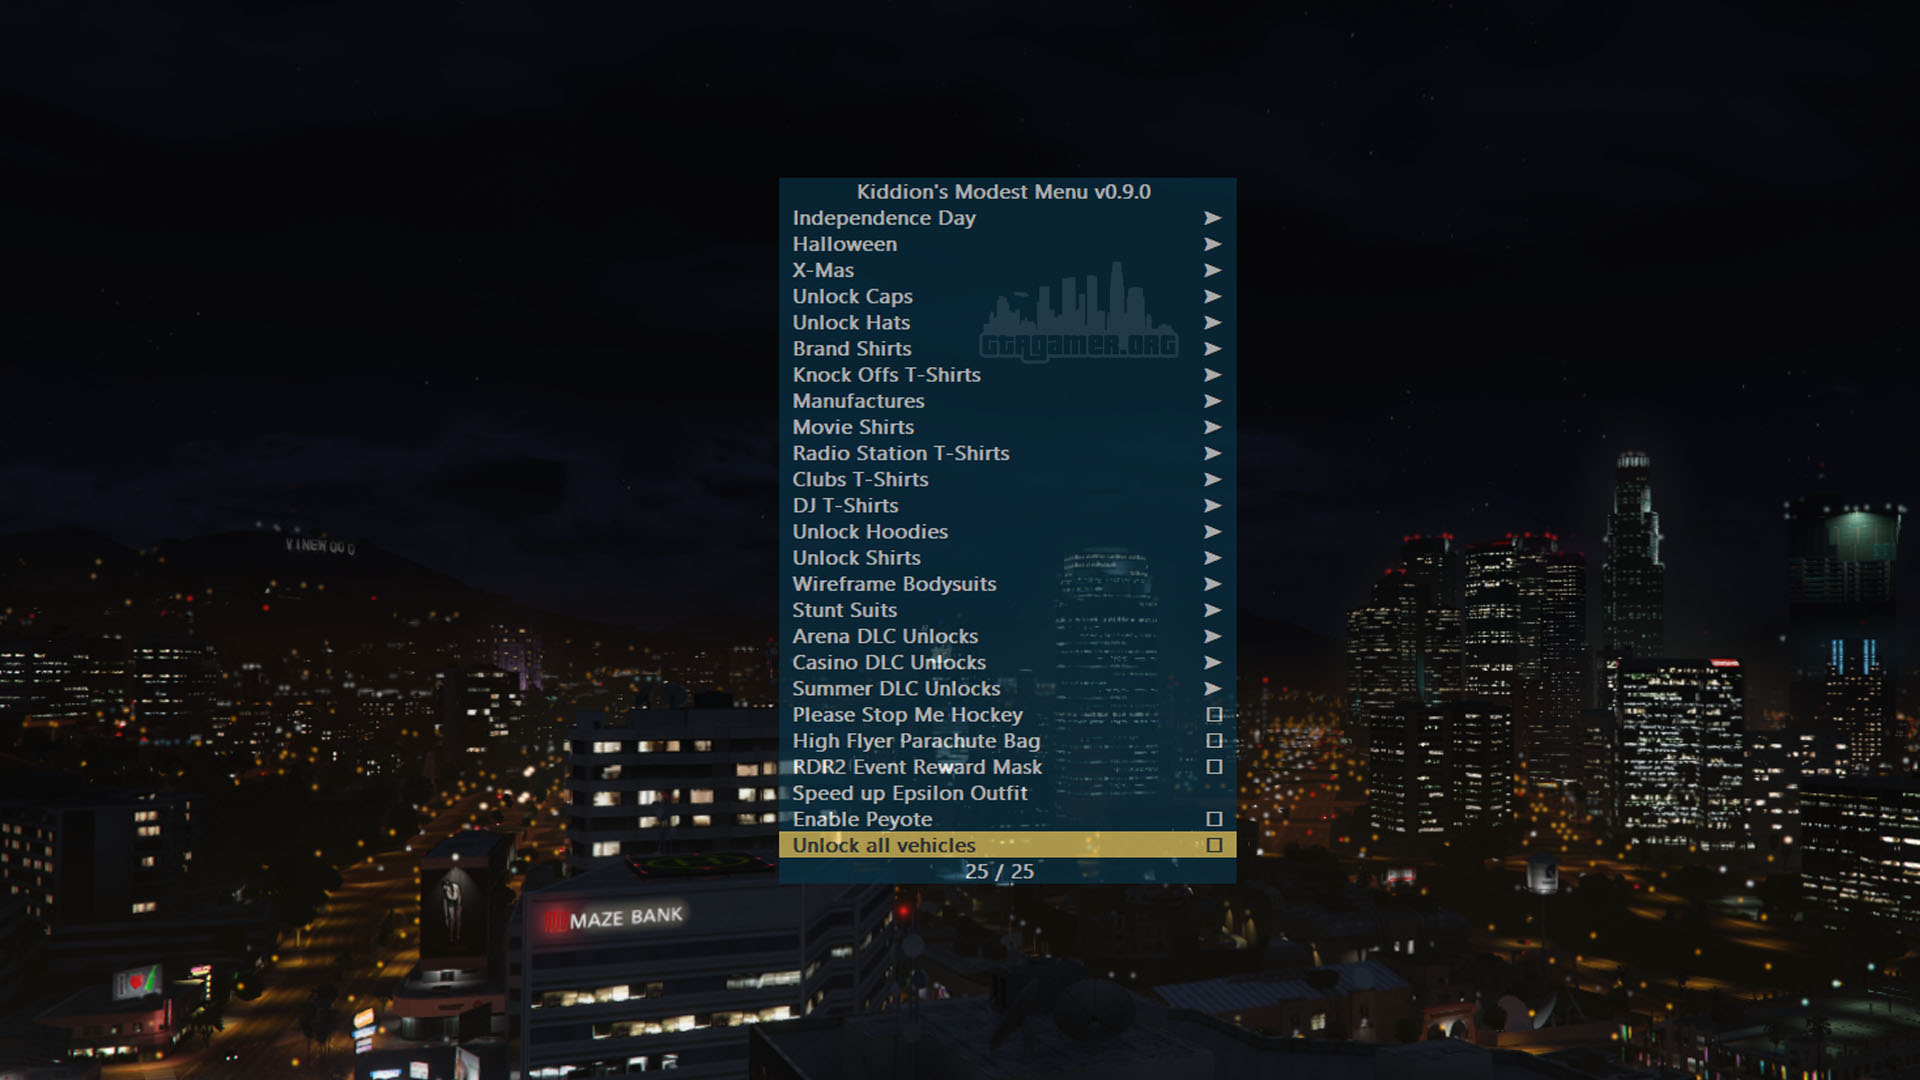 Unable to find required gta 5 offsets 0 kiddons menu (120) фото